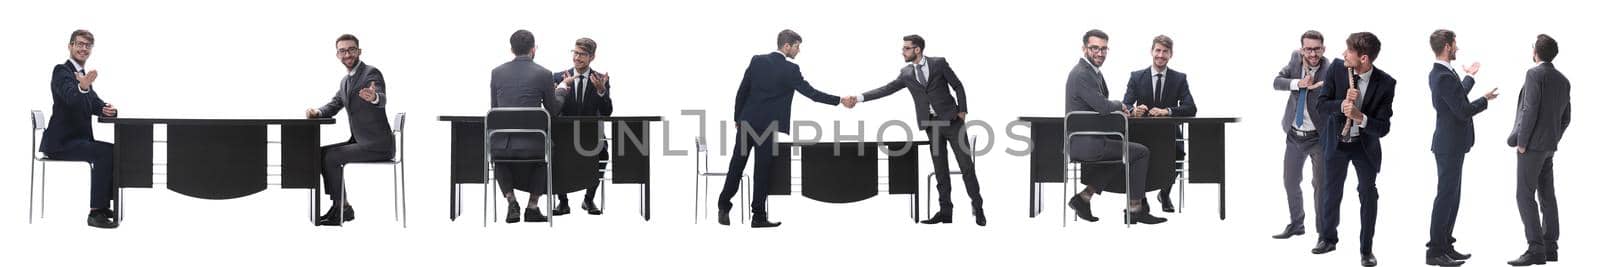 in full growth. two business people discussing something. isolated on white background